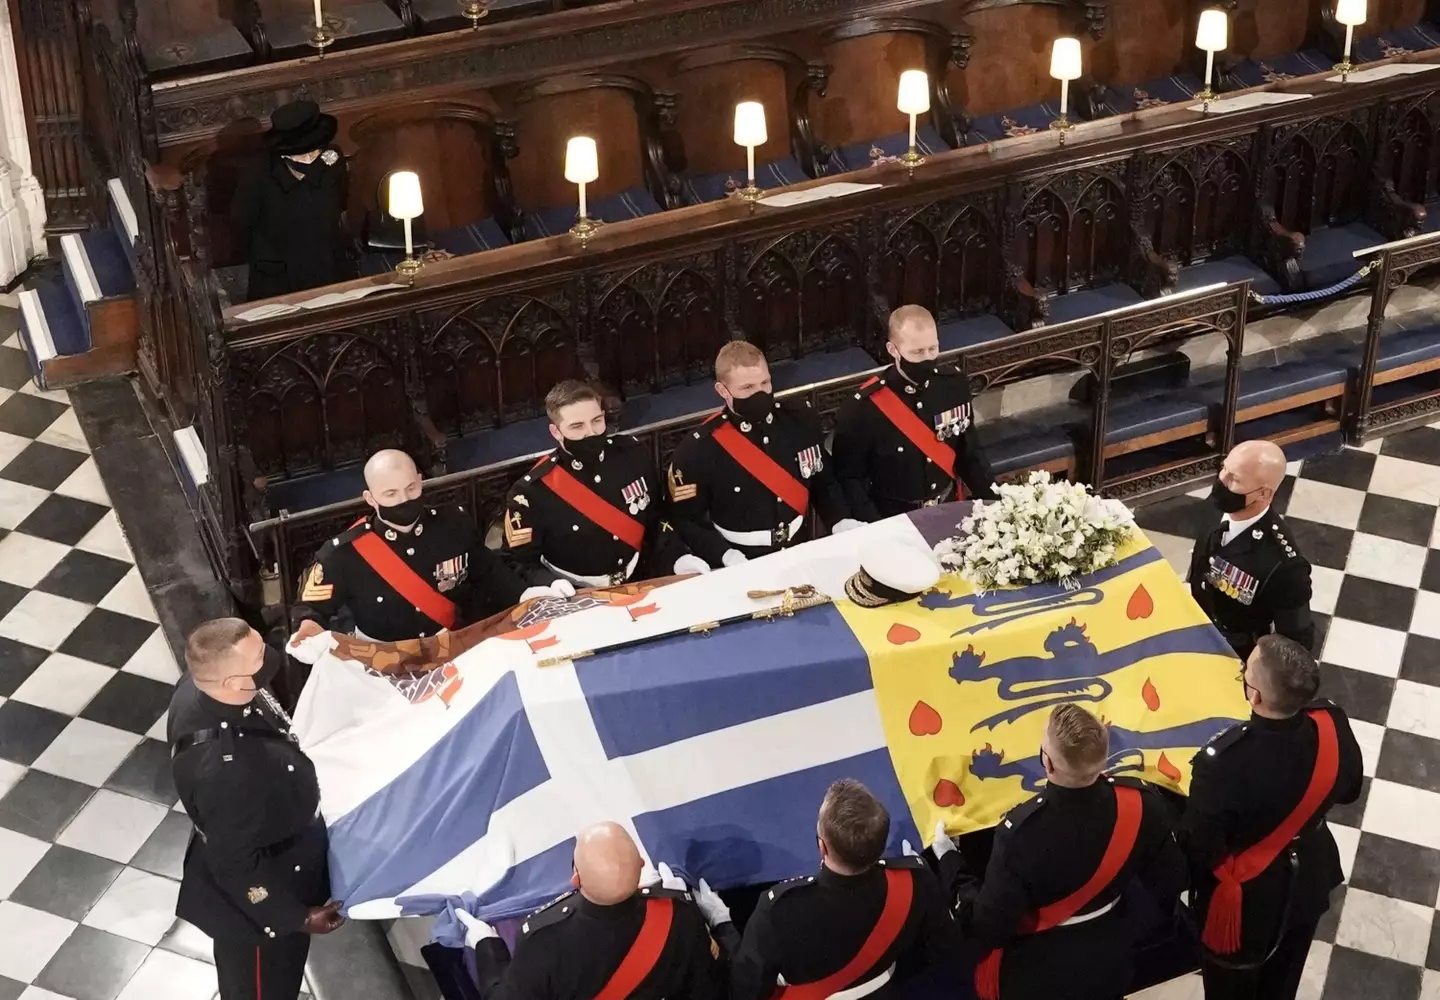 The coffin of the Duke of Edinburgh during his funeral service at St George's Chapel, Windsor Castle.